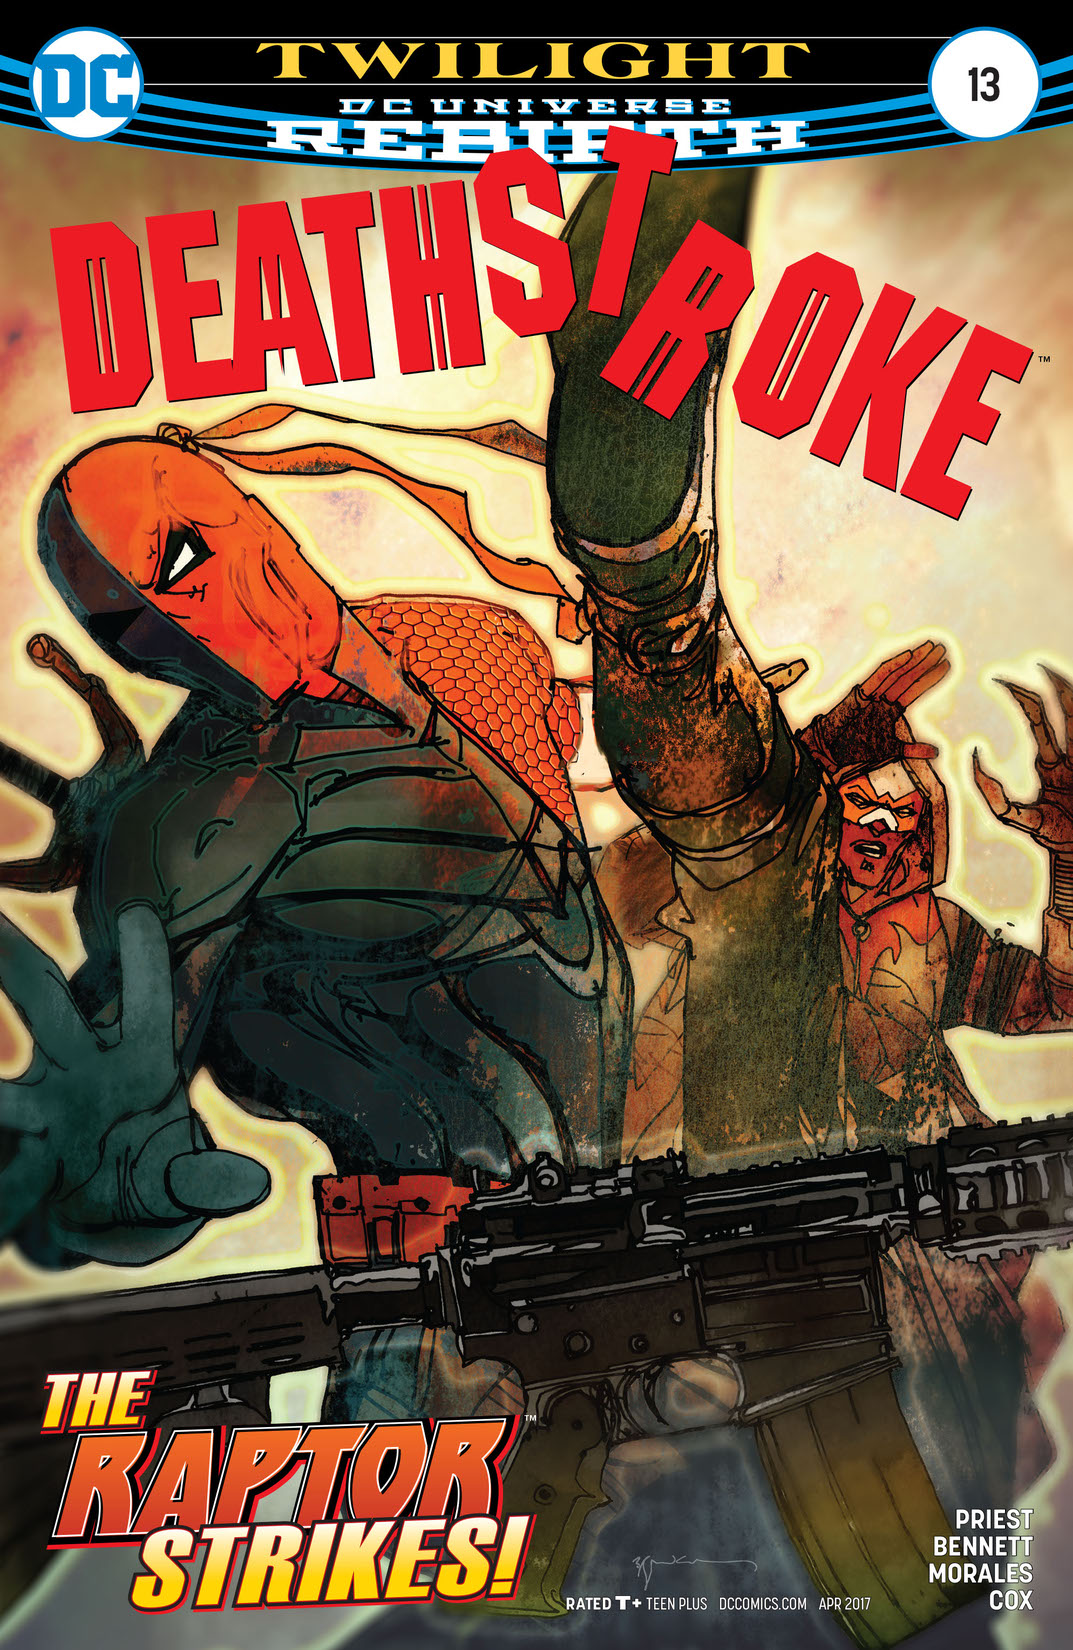 Deathstroke (2016-) #13 preview images